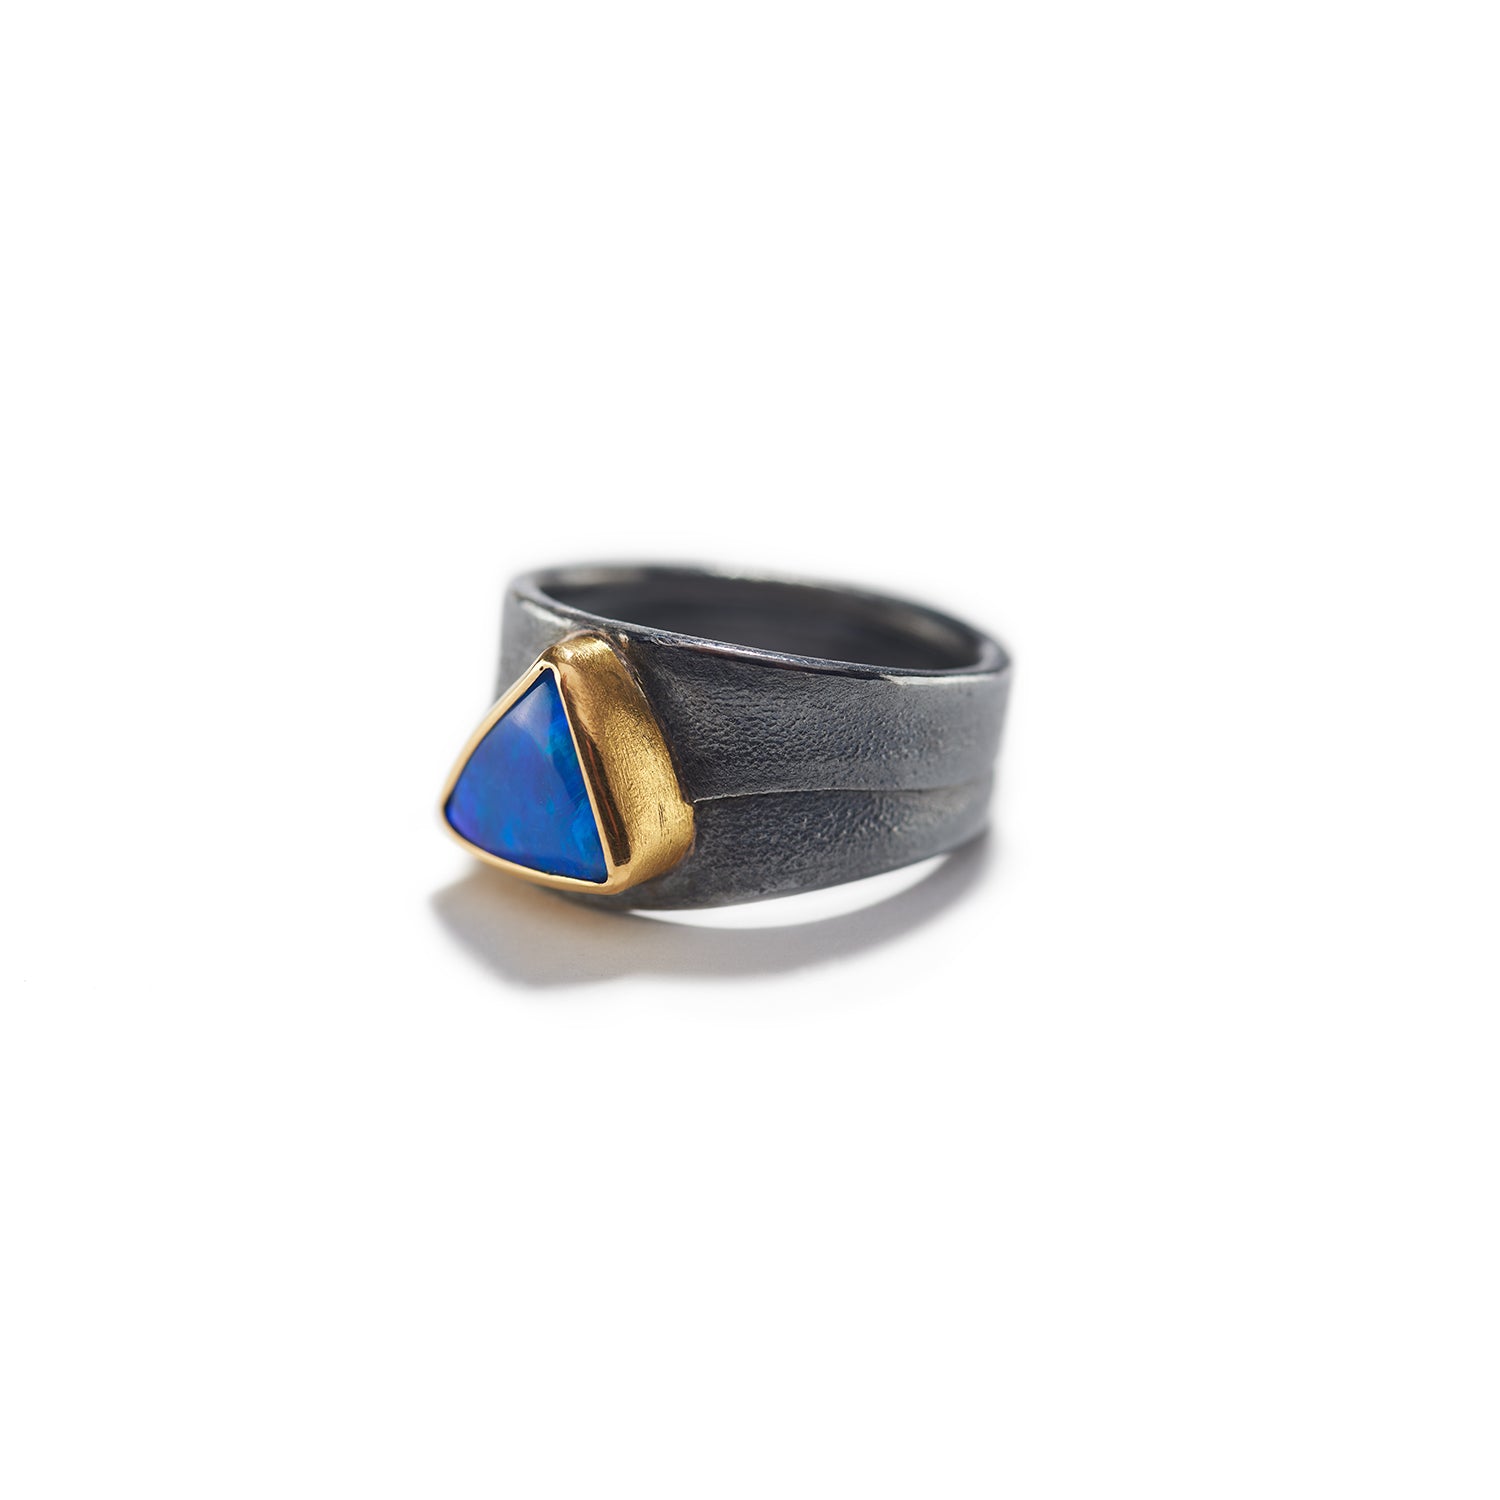 Triangle Boulder Opal Ring